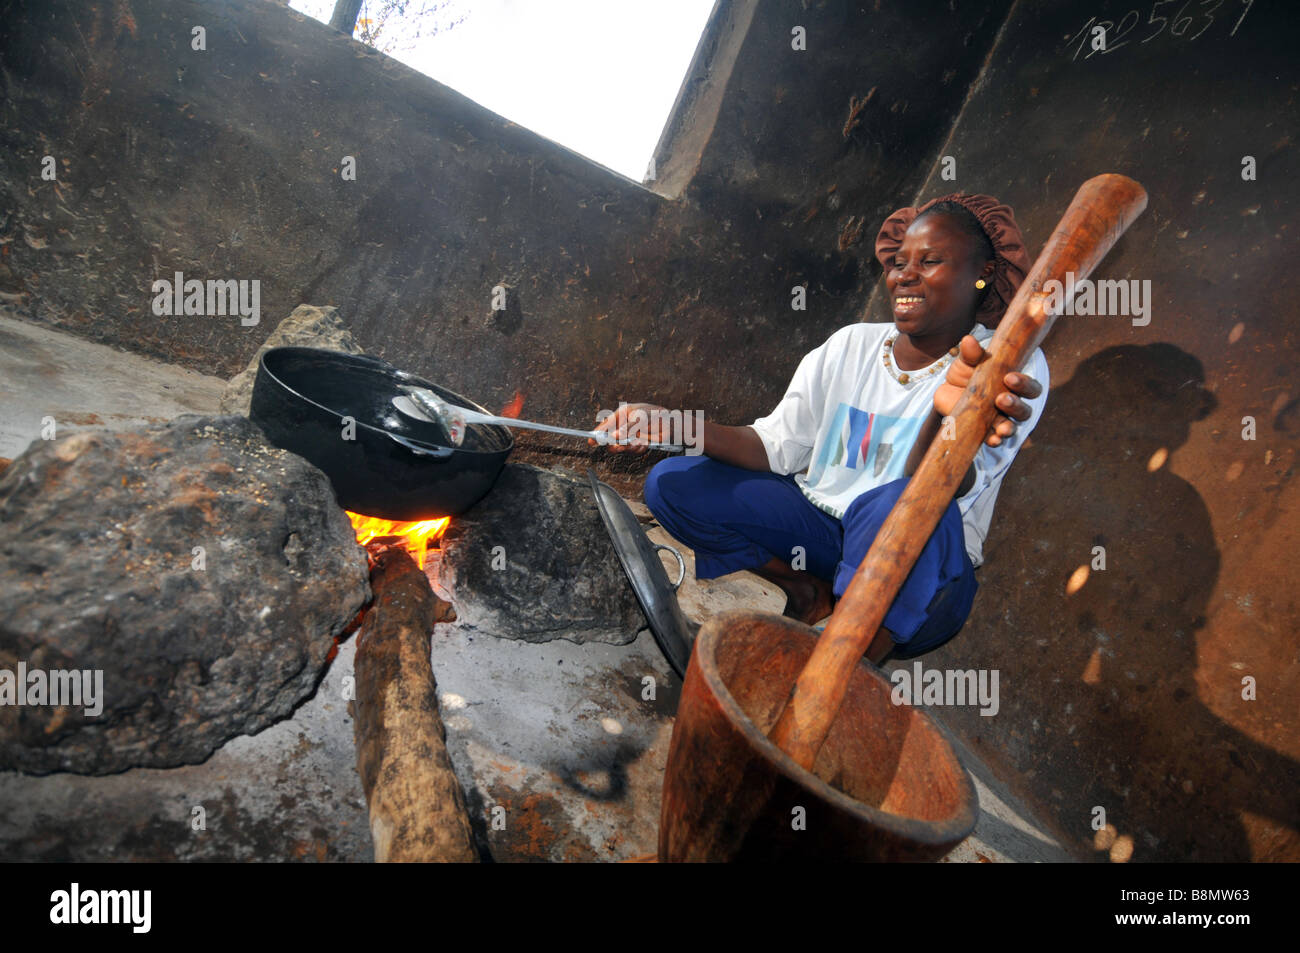 Woman cooking over an open fire in her basic rural village kitchen, The Gambia, West Africa Stock Photo